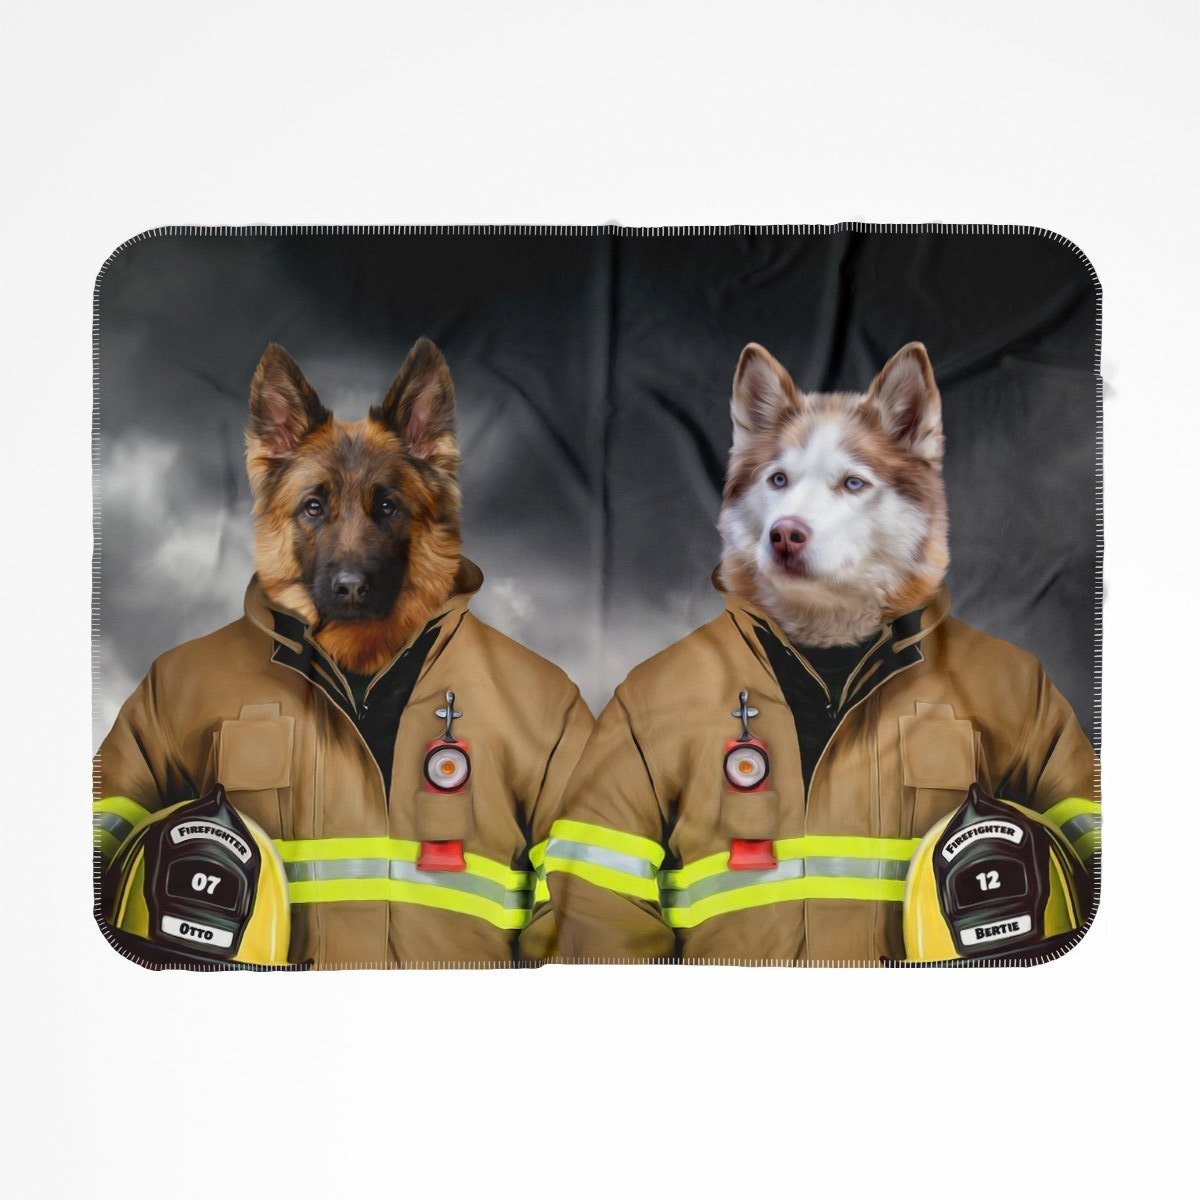 The Firemen: Custom Pet Blanket - Paw & Glory - #pet portraits# - #dog portraits# - #pet portraits uk#Pawandglory, Pet art blanket,personalized dog throw blankets, pup on a blanket, blanket with pet, put your pets face on a blanket, dog design blanket